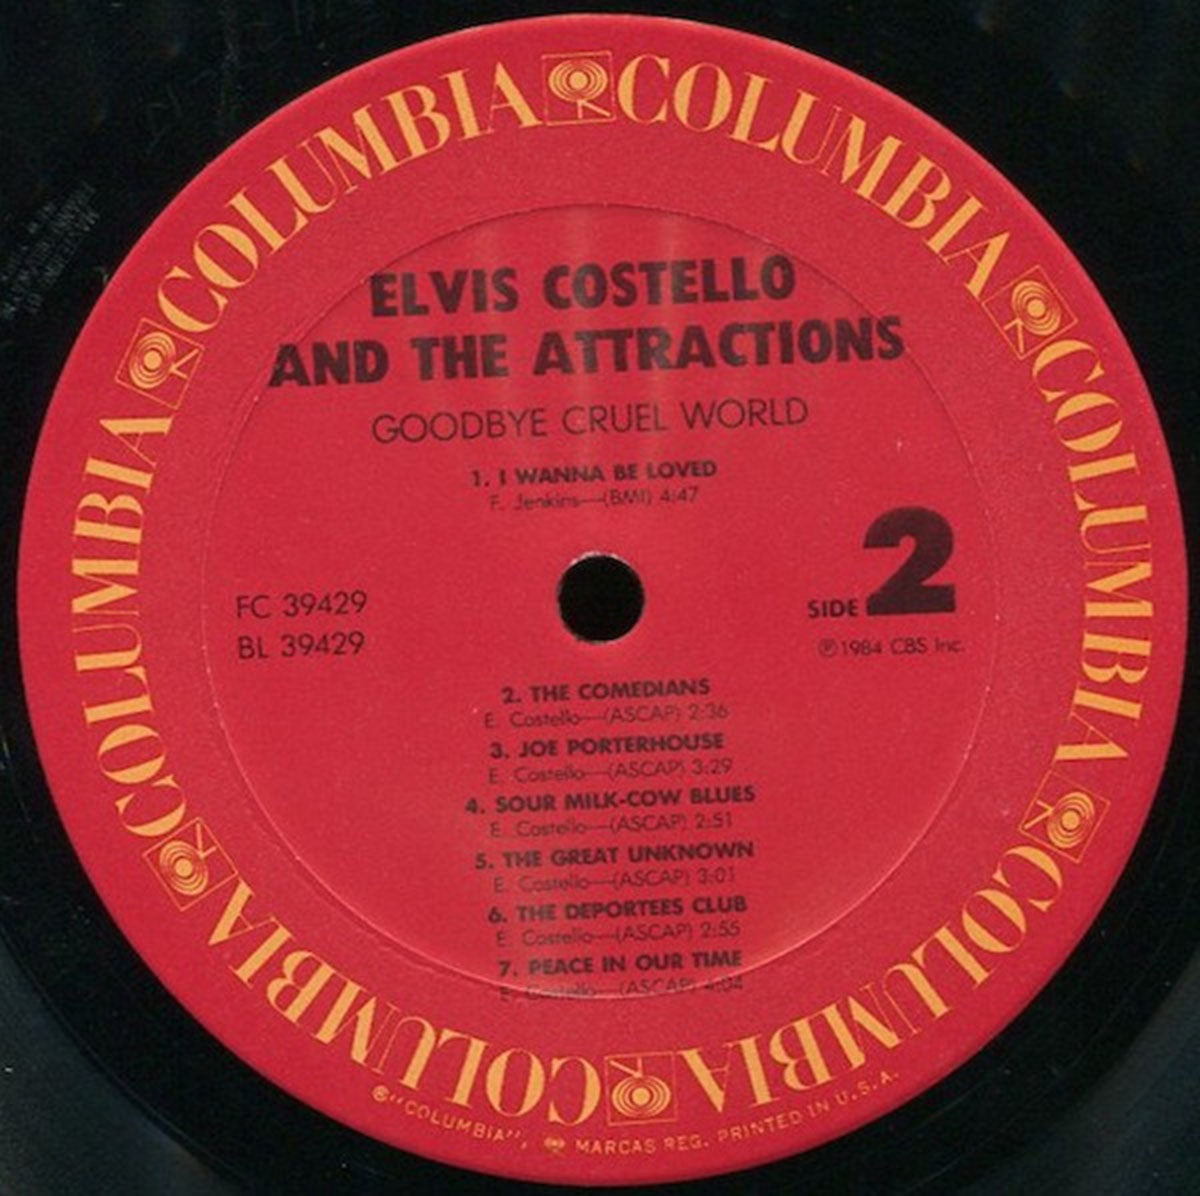 Elvis Costello And The Attractions – Goodbye Cruel World - US Pressing